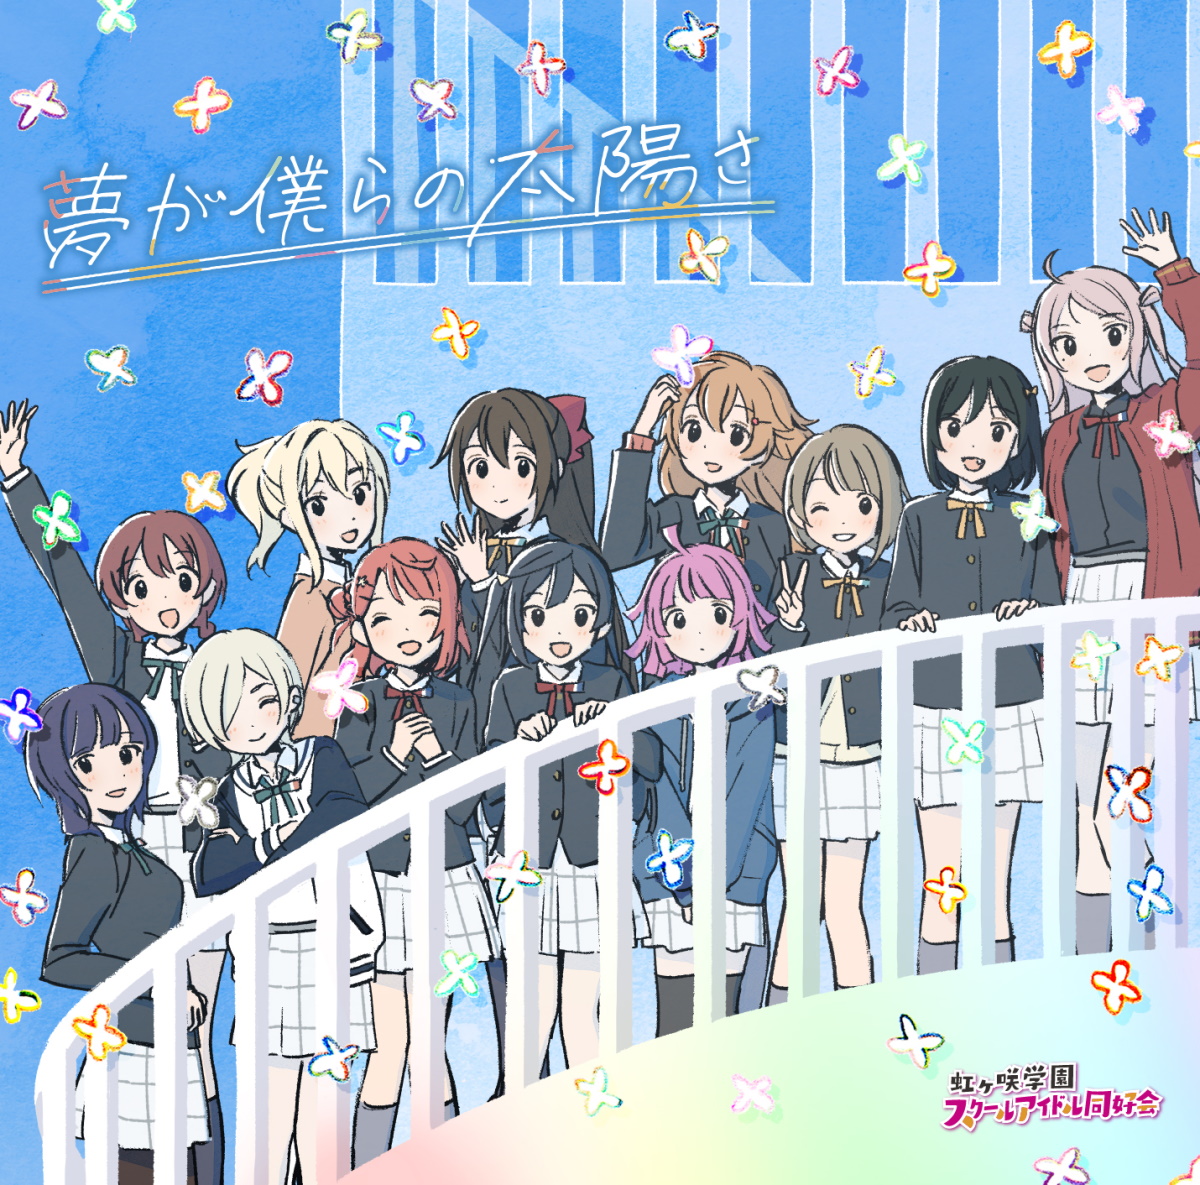 Cover for『Nijigasaki High School Idol Club - Ryouran! Victory Road』from the release『TV Anime 